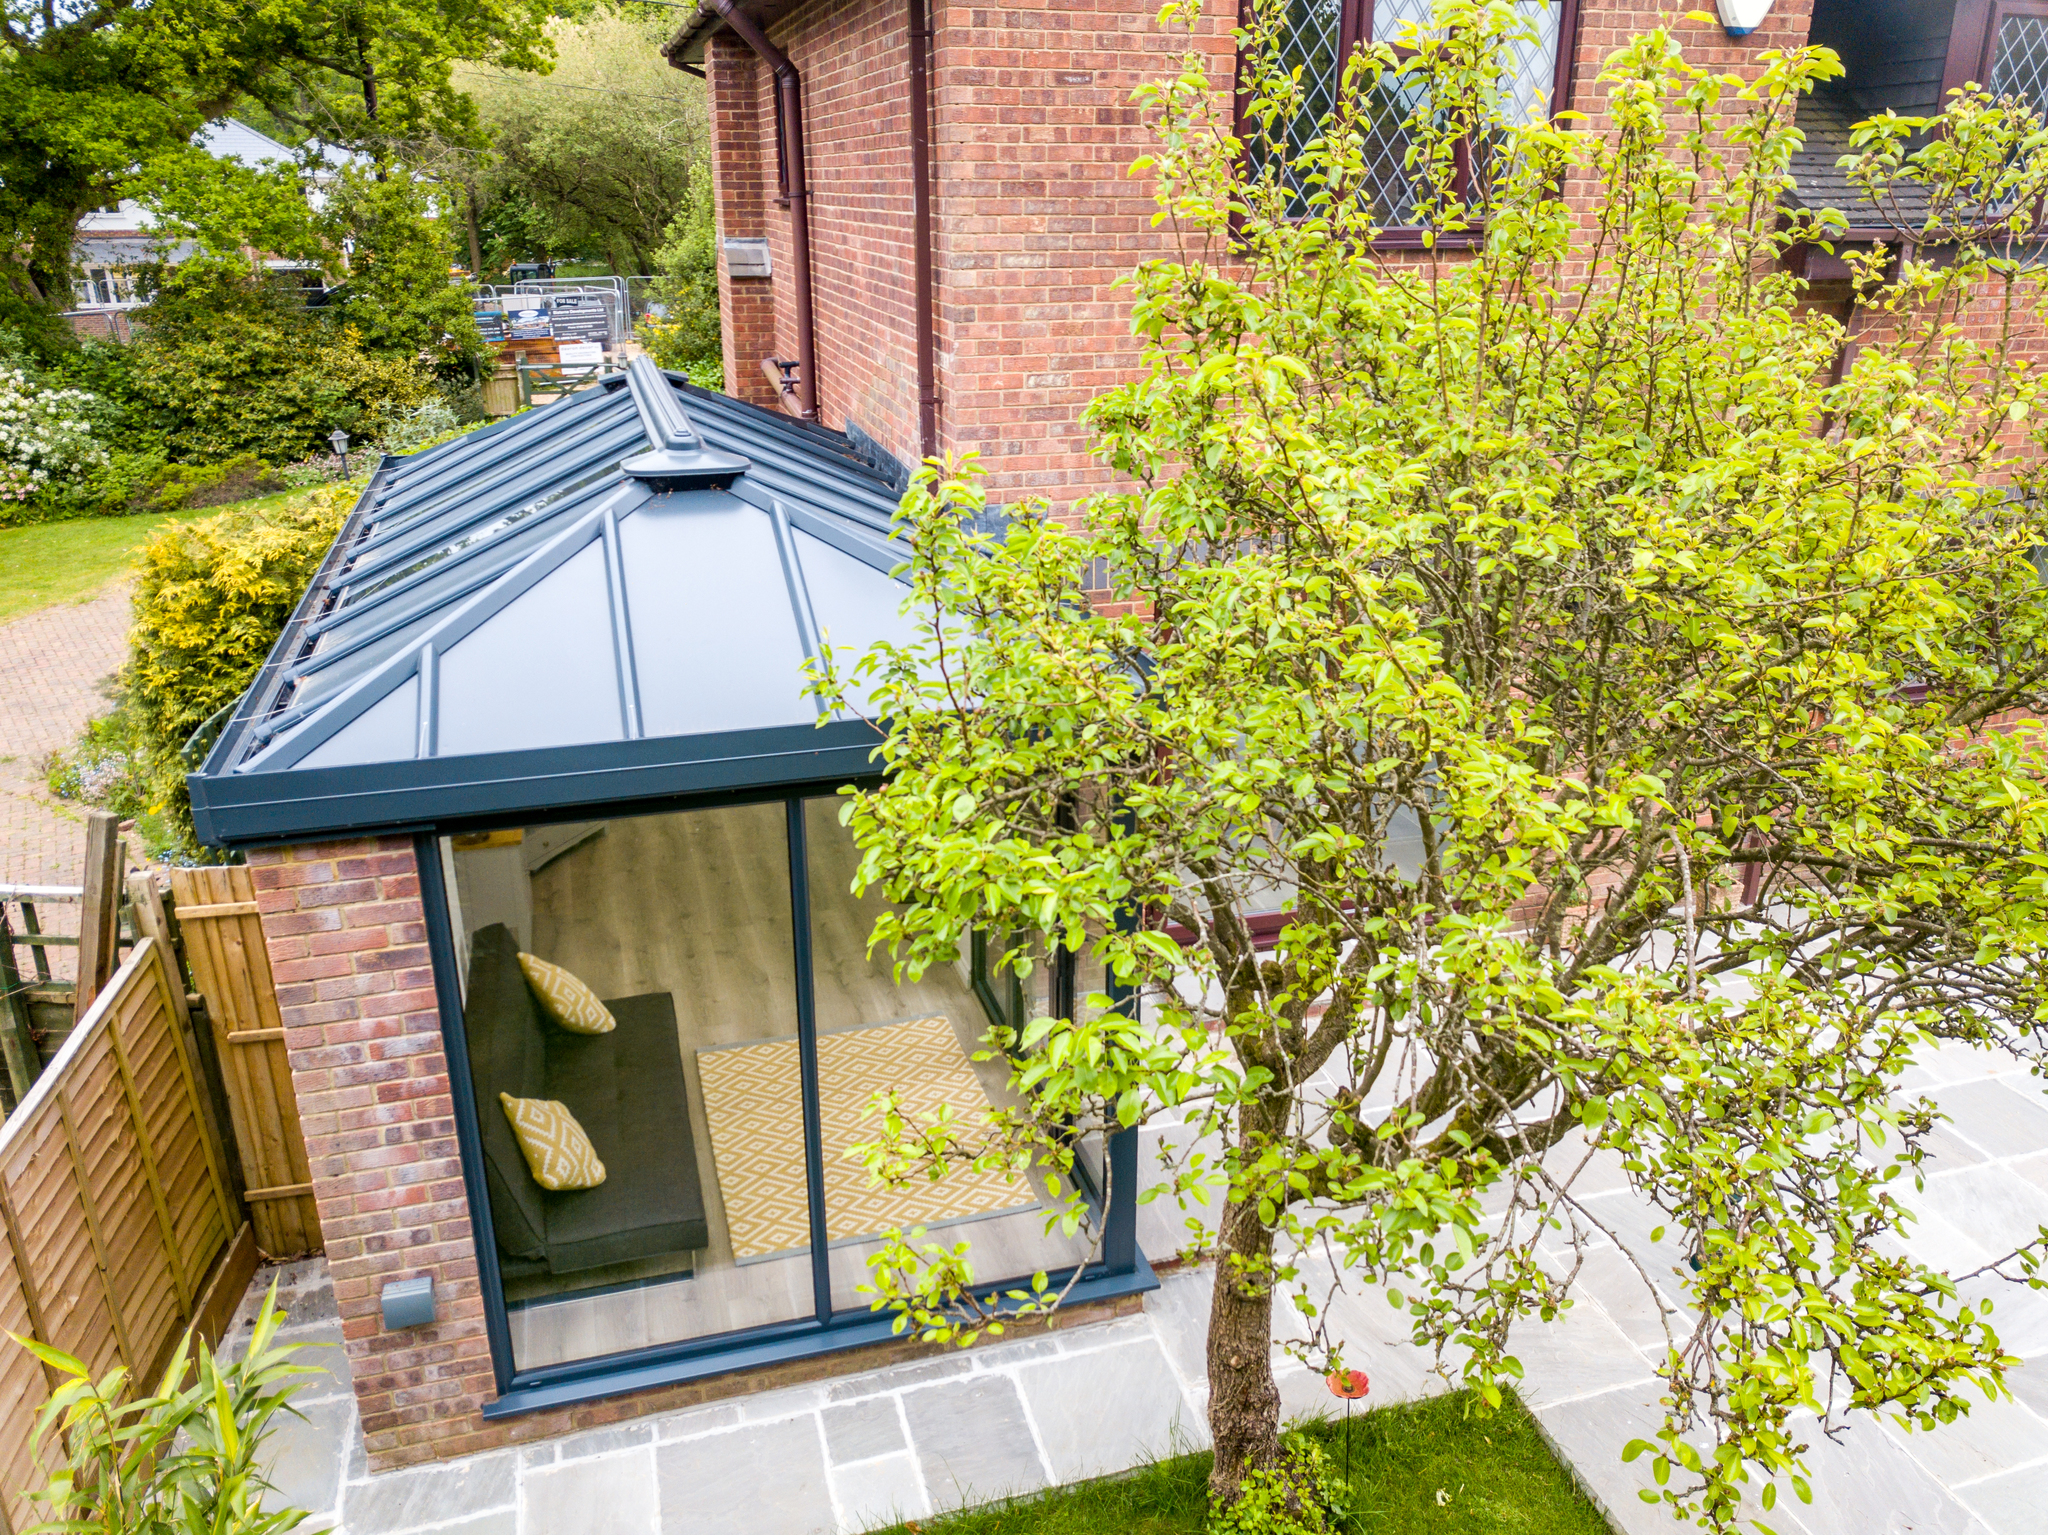 High angle image of a brand new Livin room conservatory design.